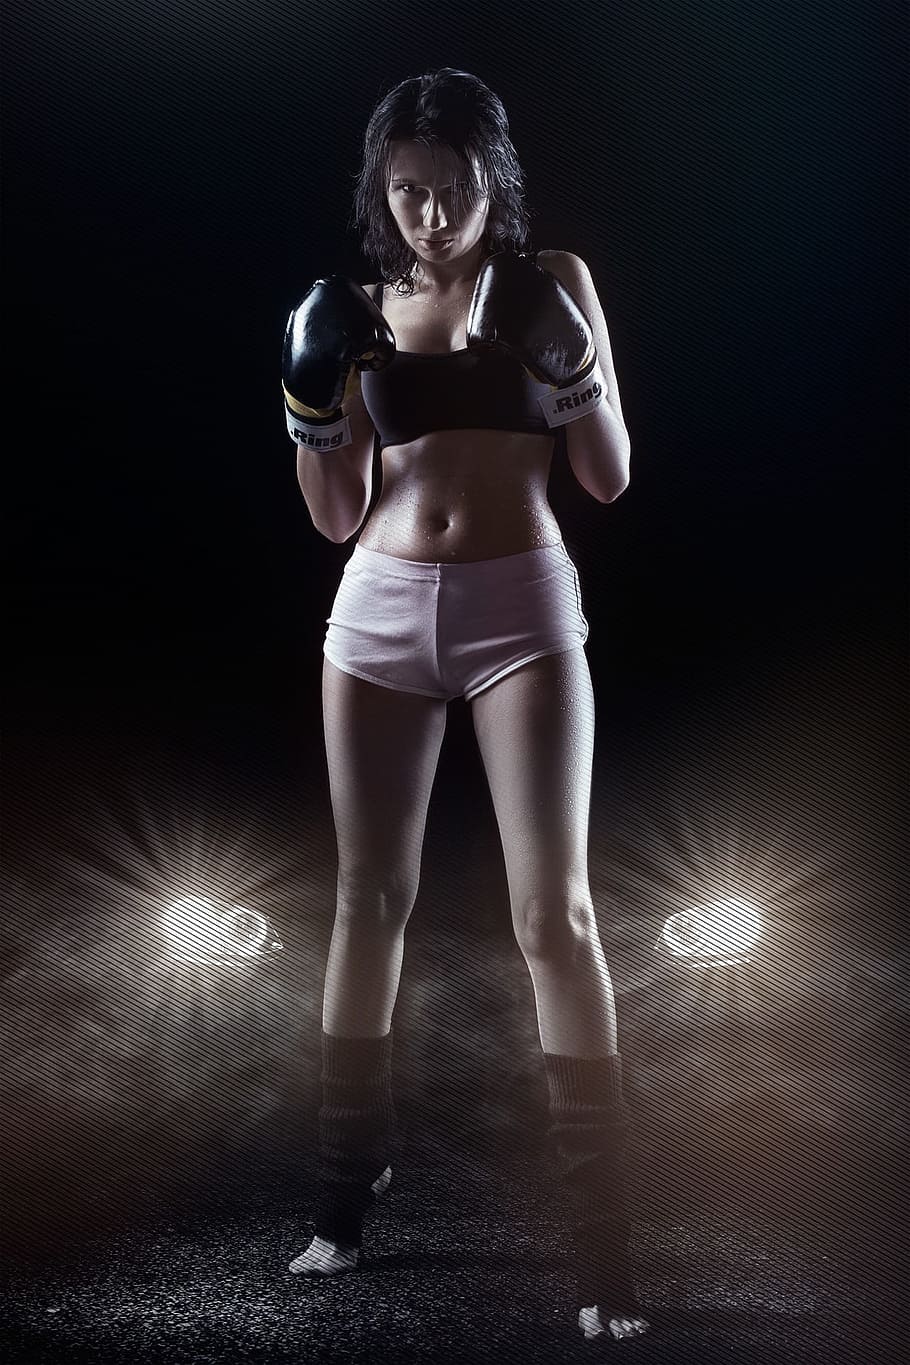 girl, boxing, fit, fitness, workout, woman, lady, human, activity, rest